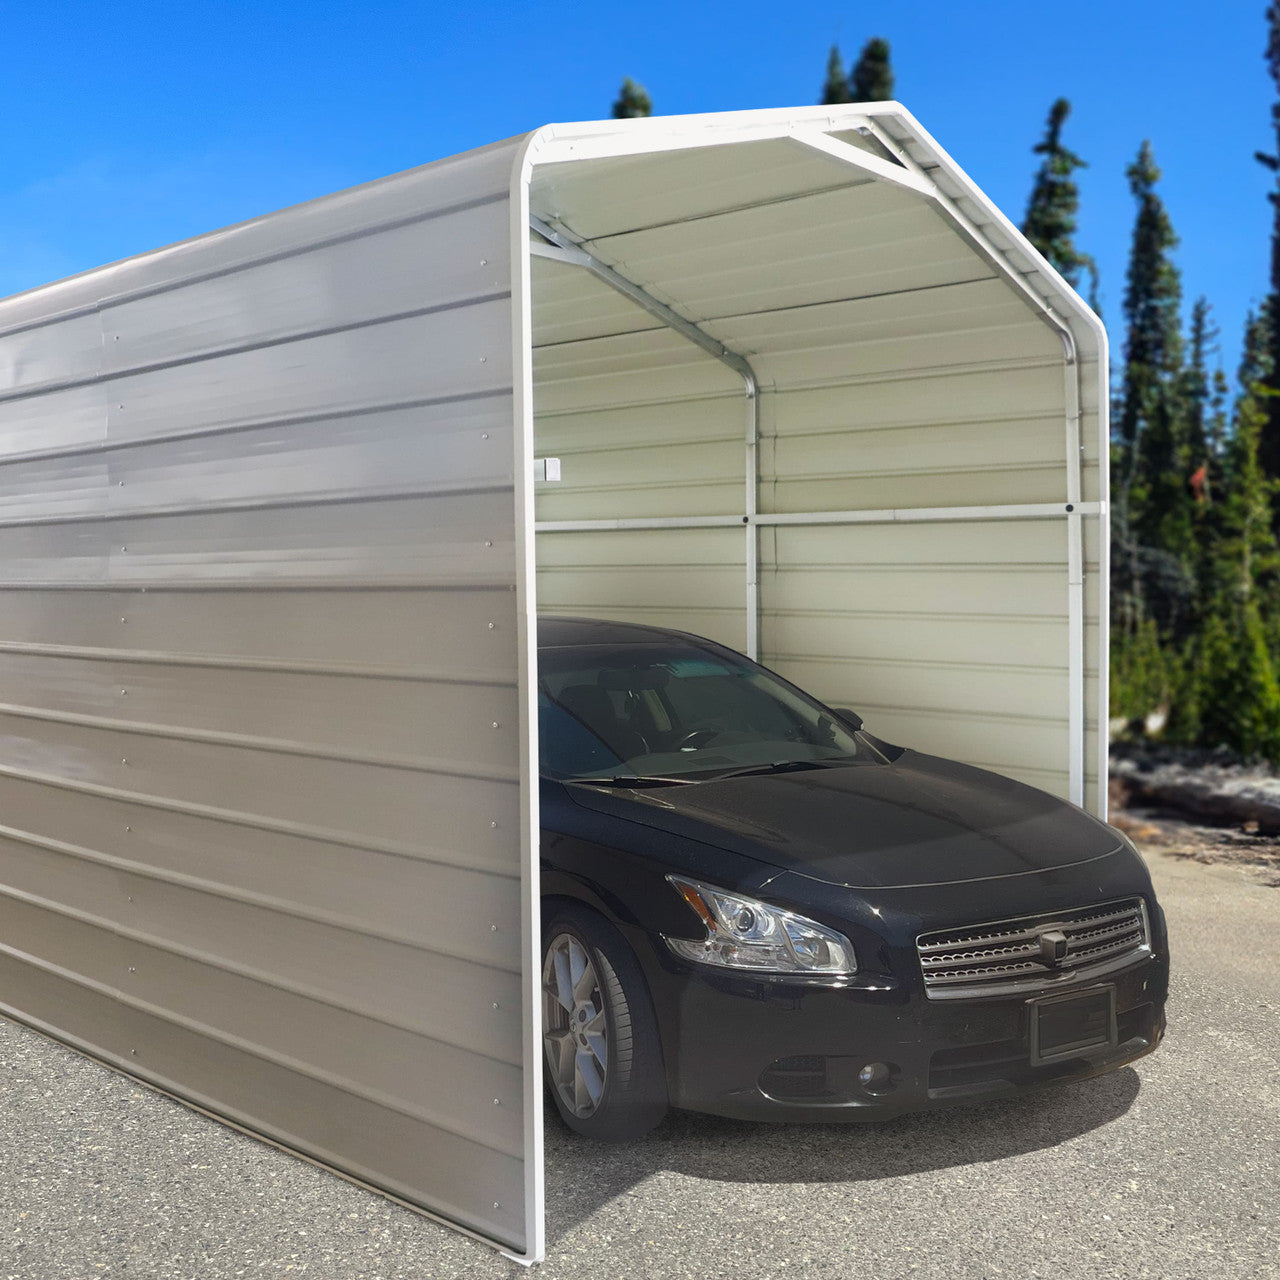 Aleko 12W x 26L x 10H ft. Metal Carport with Corrugated Roof and Sidewall Panels – Gray CPMS12X26GY-AP - Serenity Provision